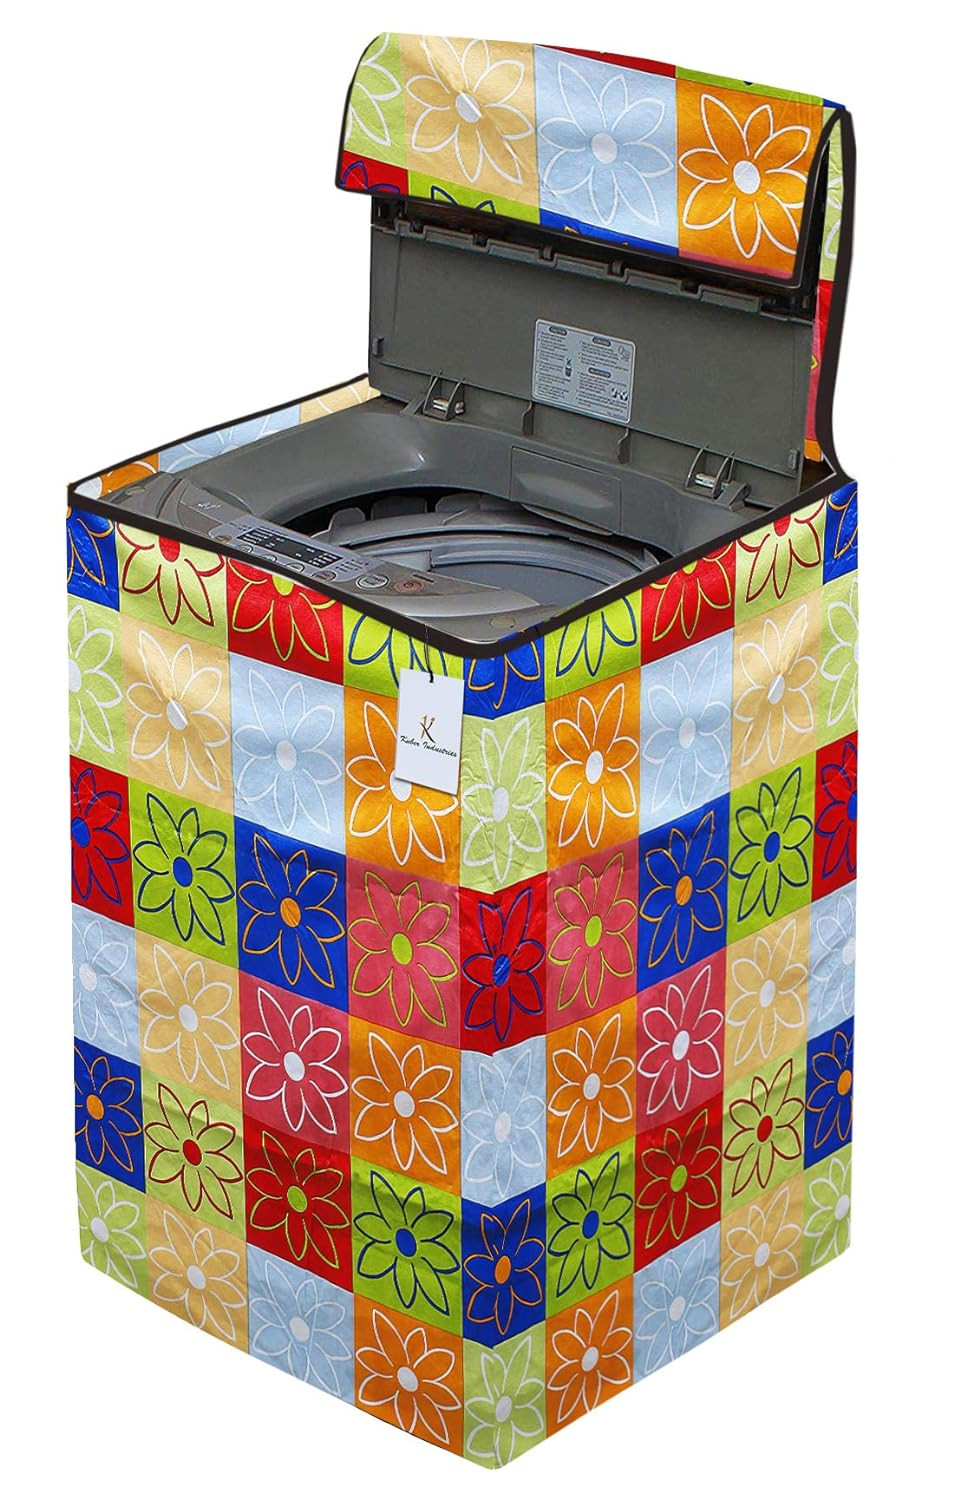 Kuber Industries Flower Design PVC Top Load Fully Automatic Washing Machine Cover with Back Hole (Multi) CTKTC33855